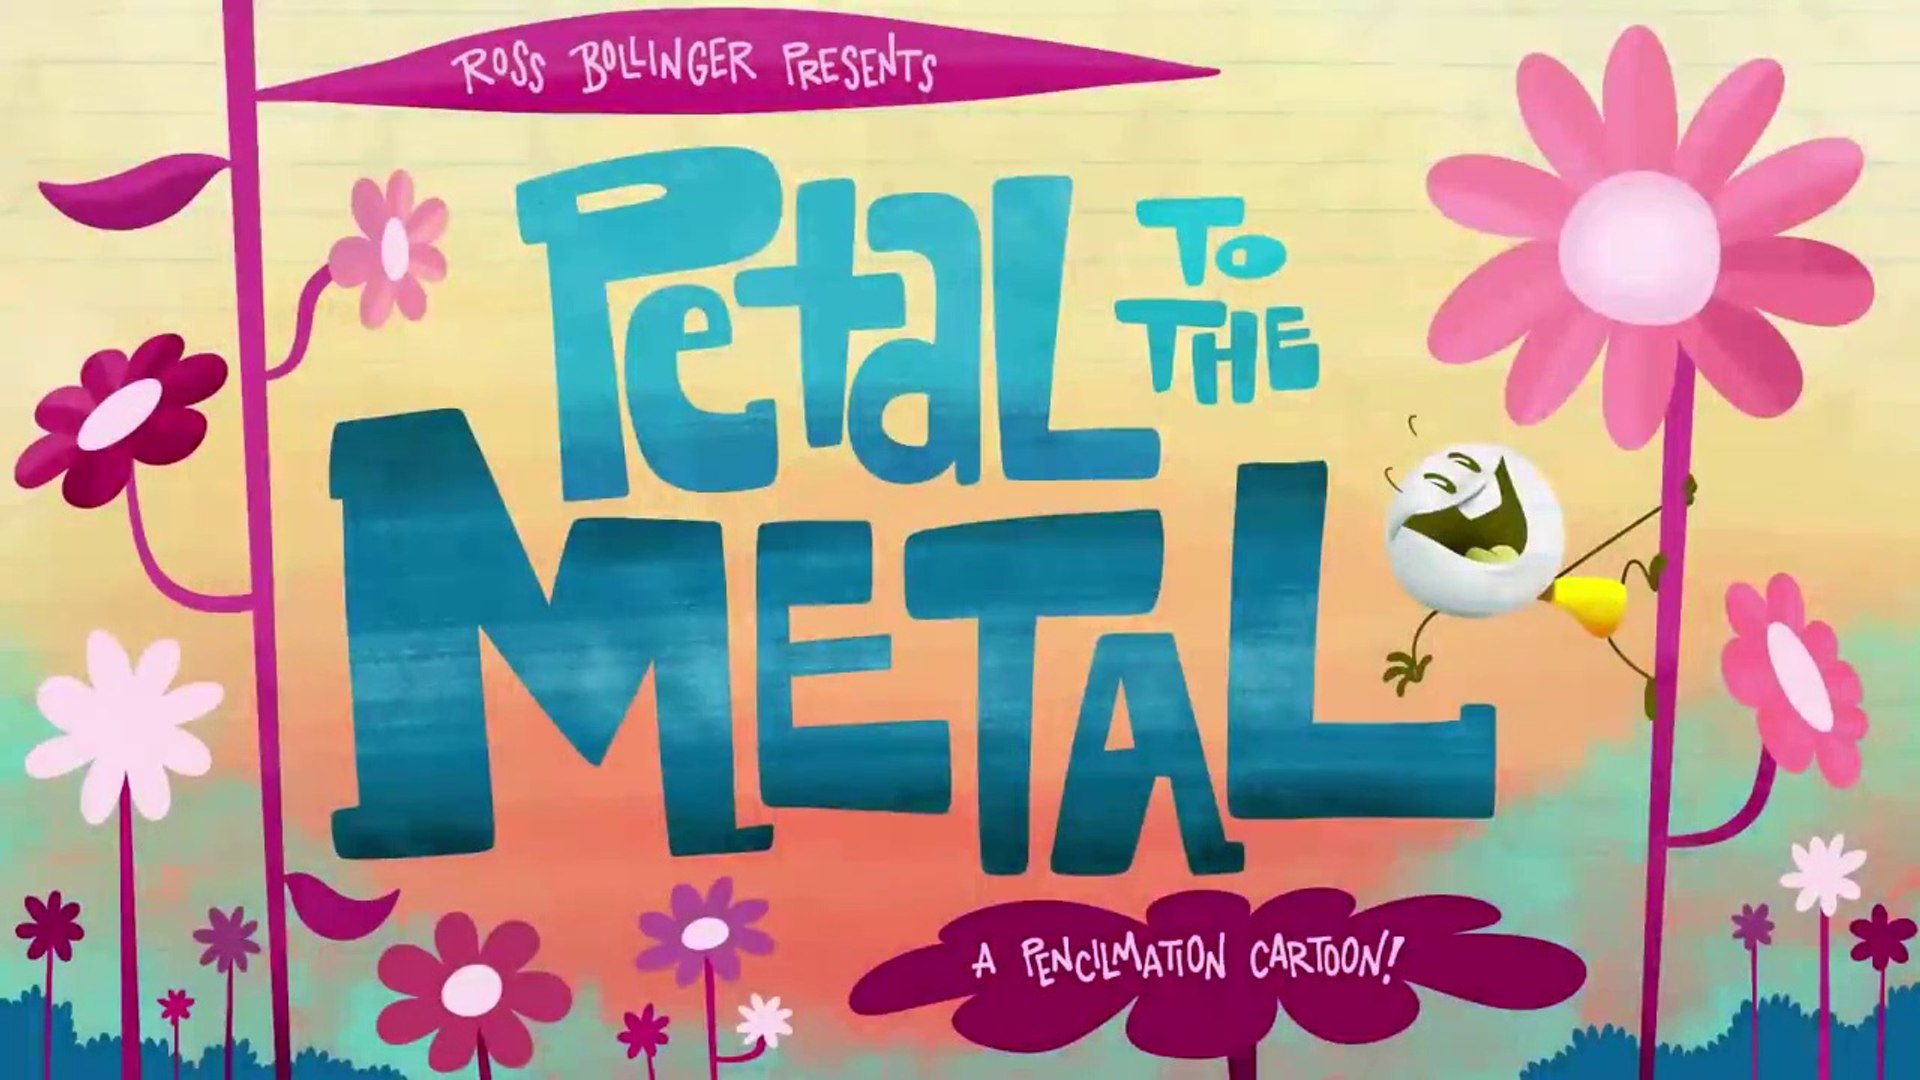 Petal To The Metal And More Pencilmation! - video Dailymotion